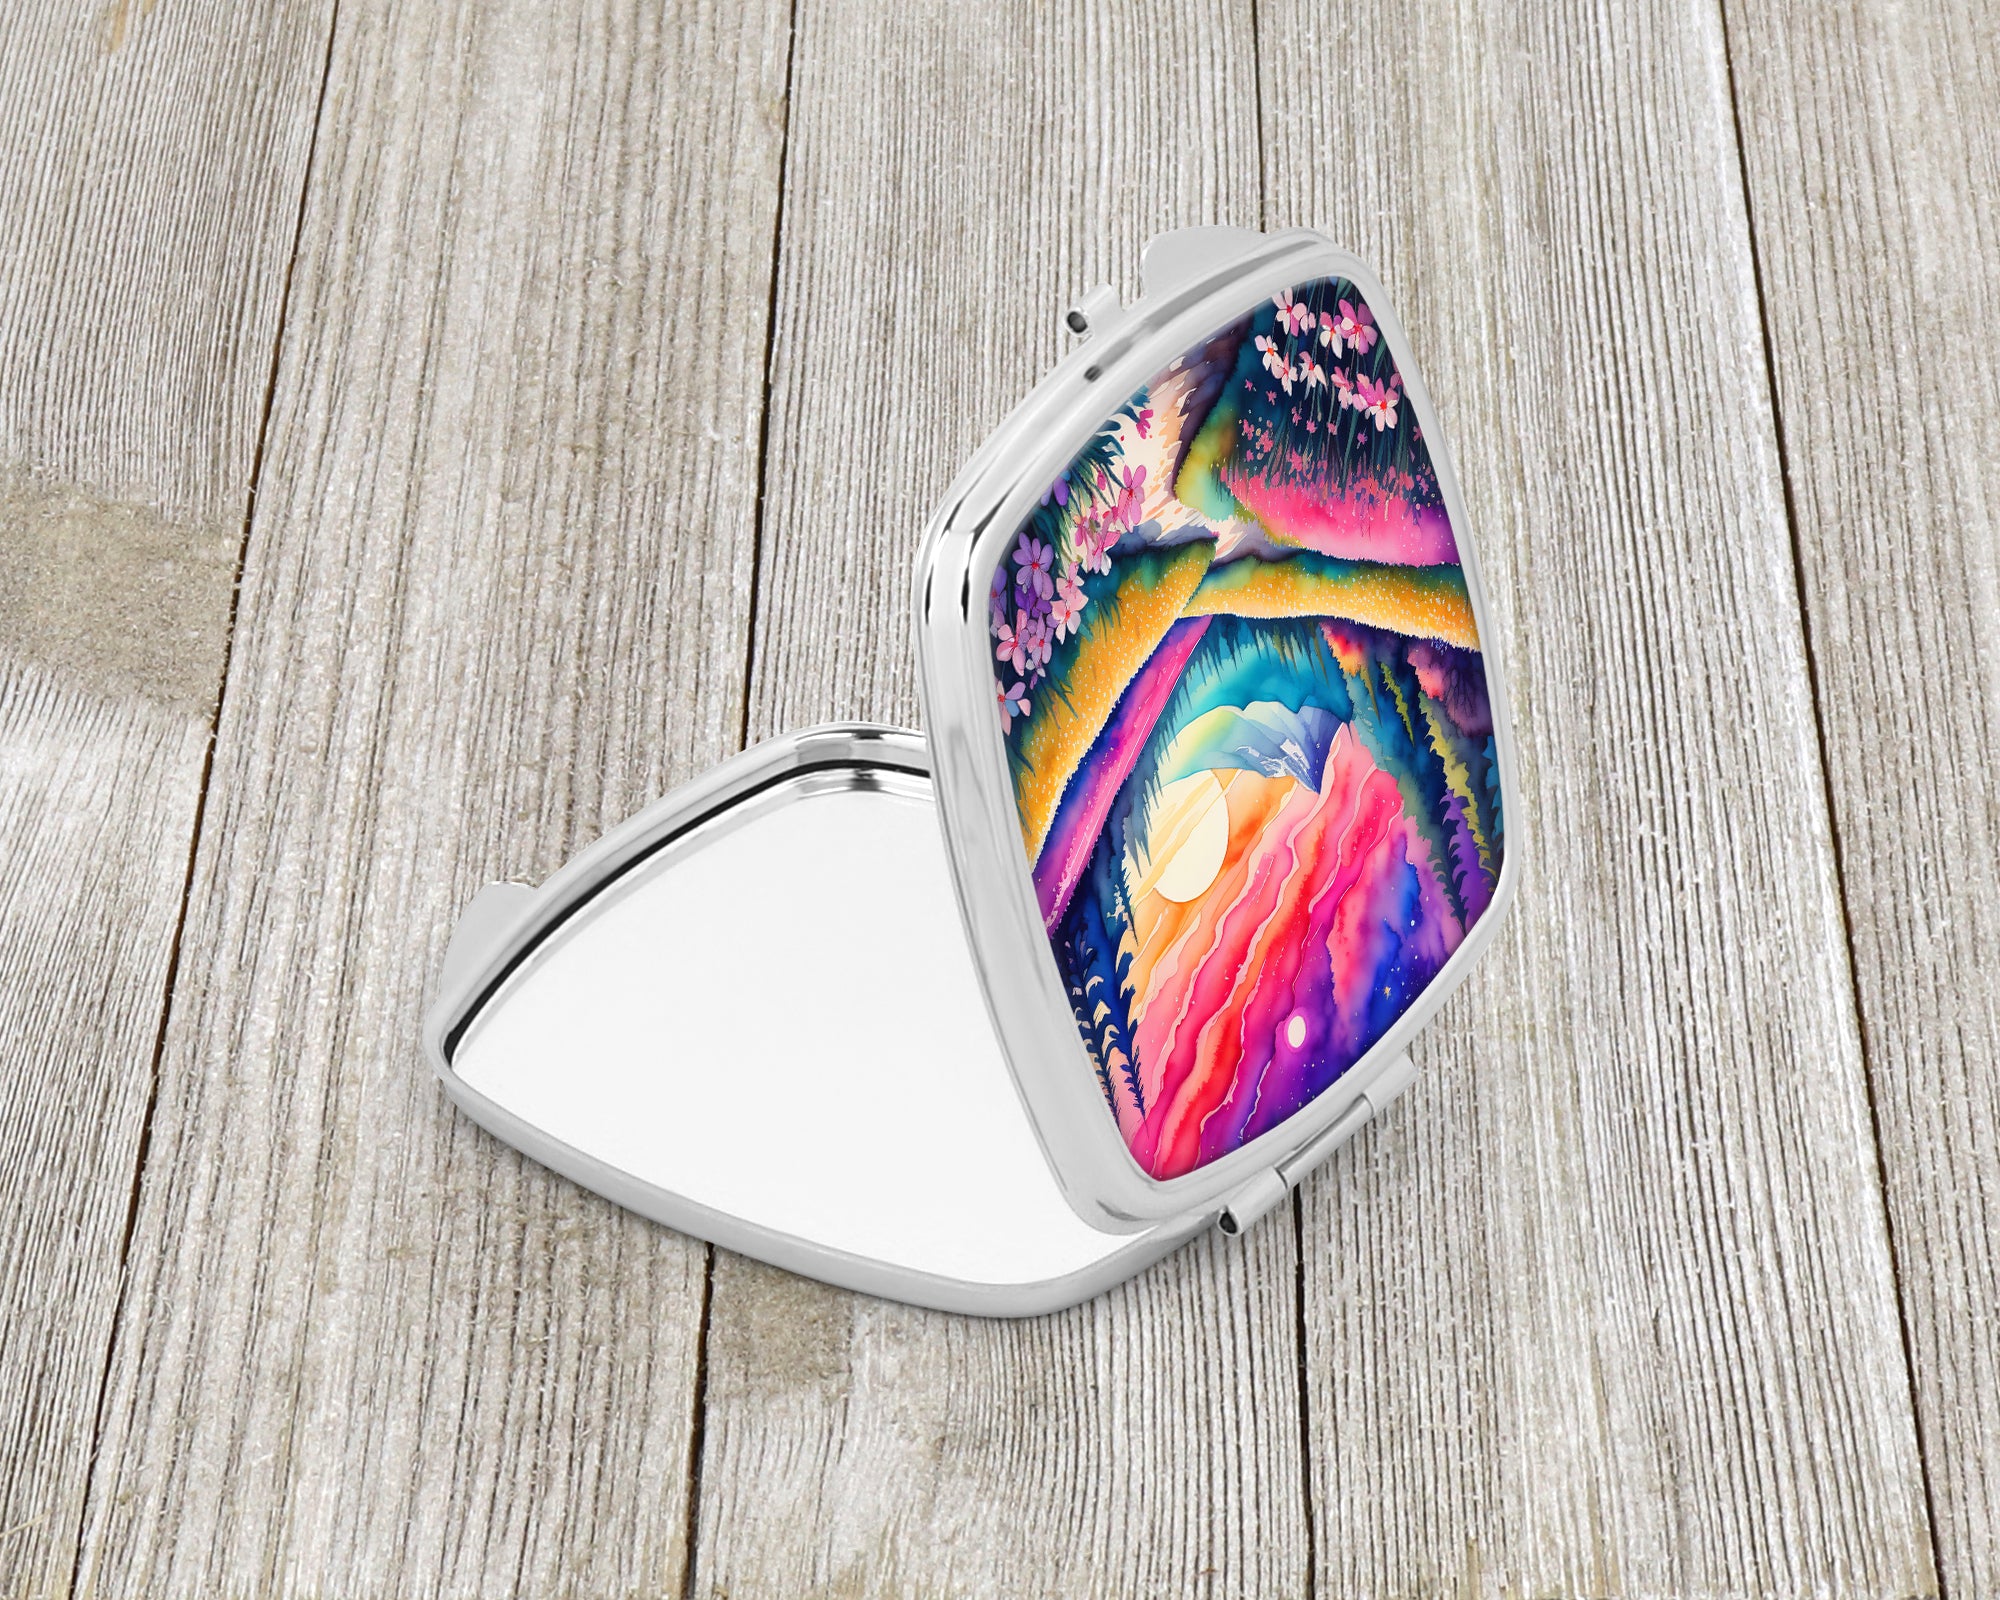 Buy this Colorful Phlox Compact Mirror